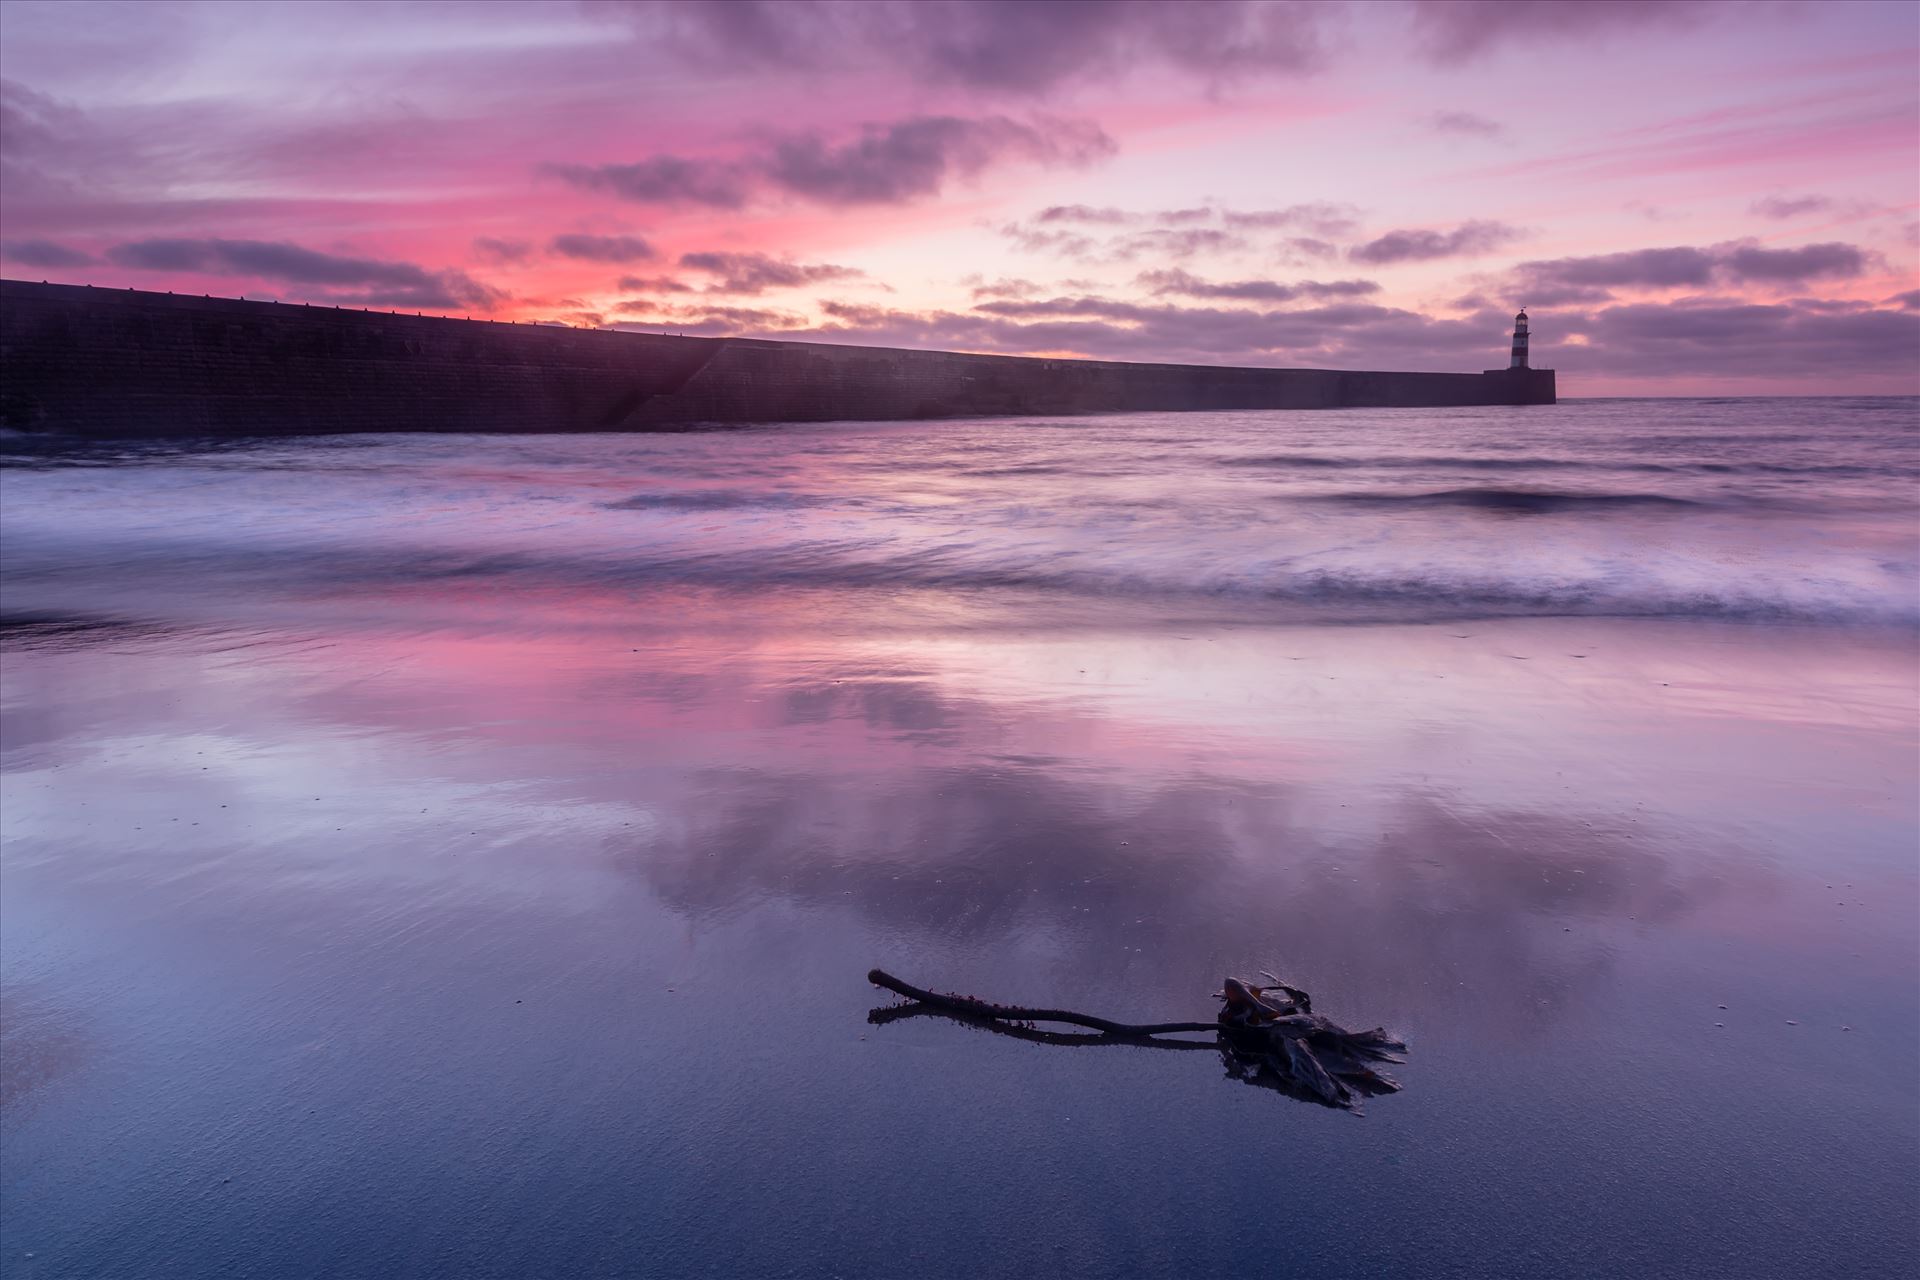 Seaham beach & pier - Another early start to catch this fabulous sunrise at Seaham beach. 
Seaham sits on the Durham coast in between Sunderland to the north & Hartlepool to the south. by philreay